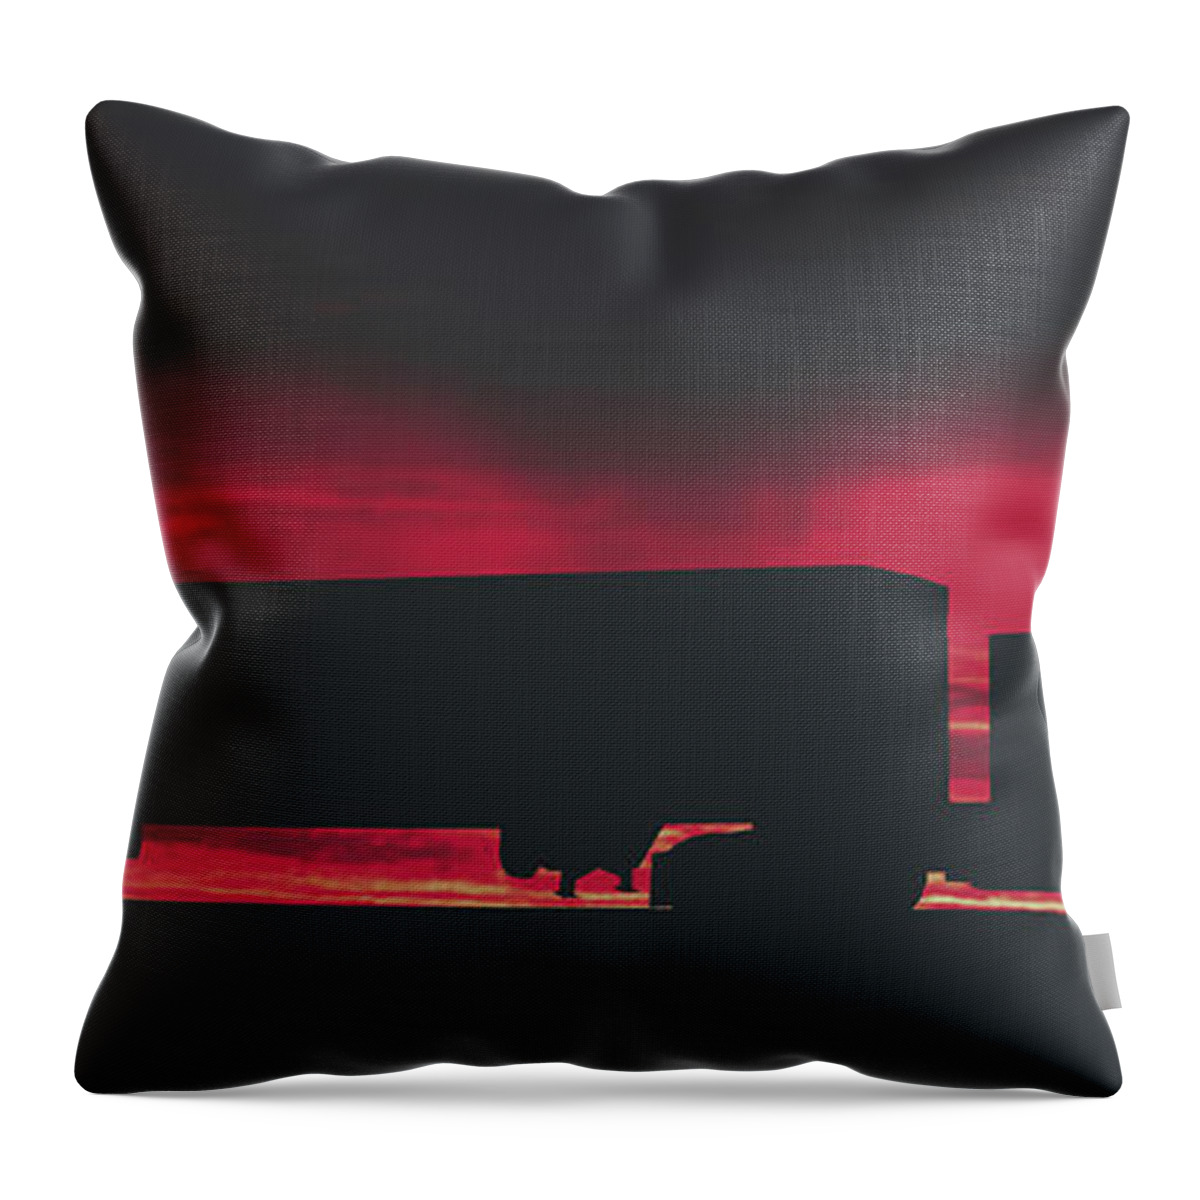 Sunset Throw Pillow featuring the photograph Big Rig At Sunset by Mountain Dreams